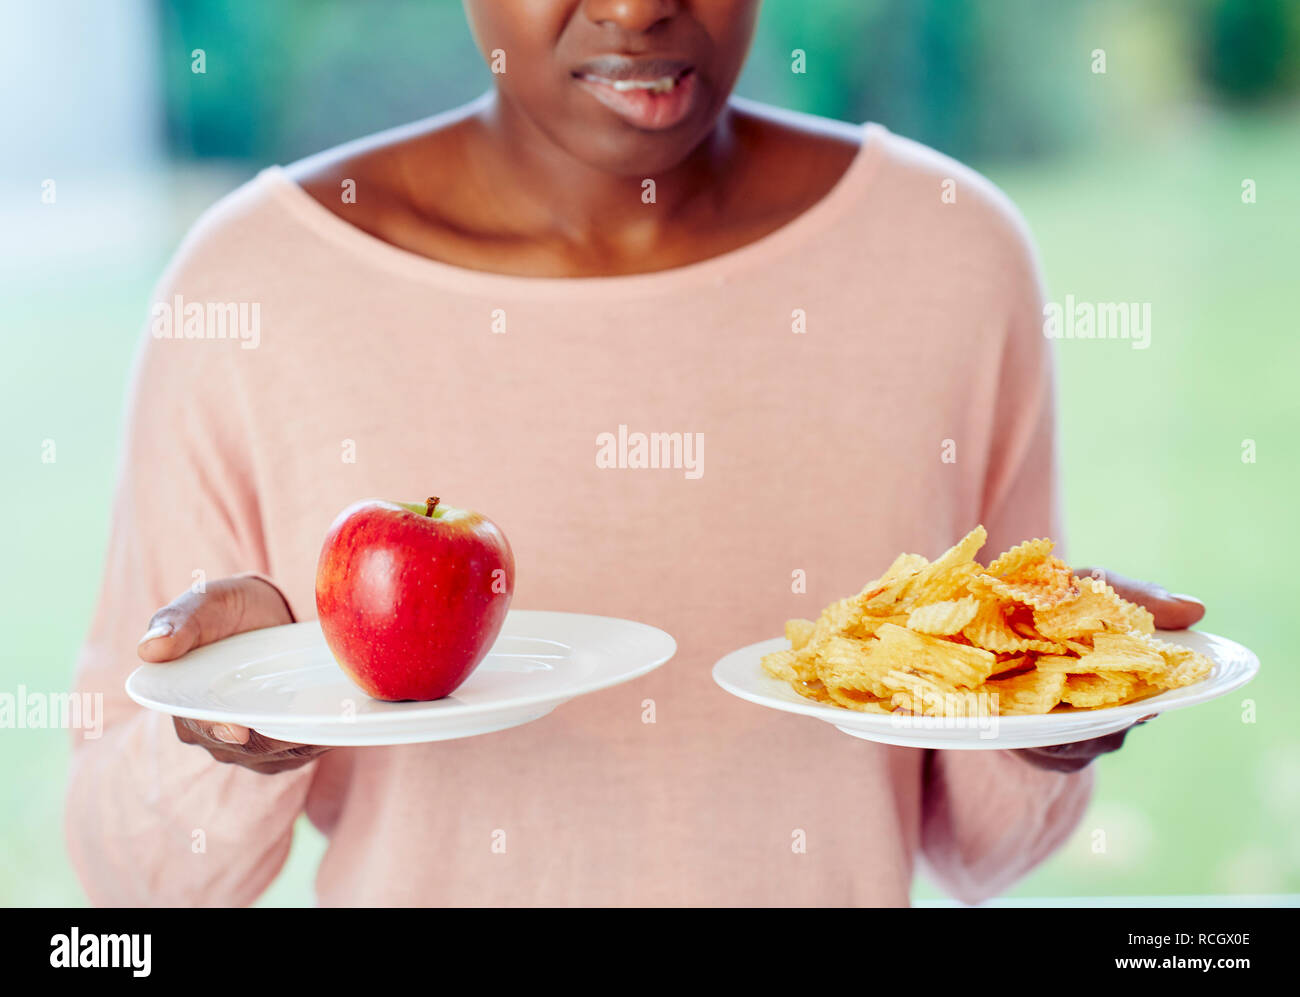 Ethnic girl undecided whether to have crisps or an apple to eat Stock Photo